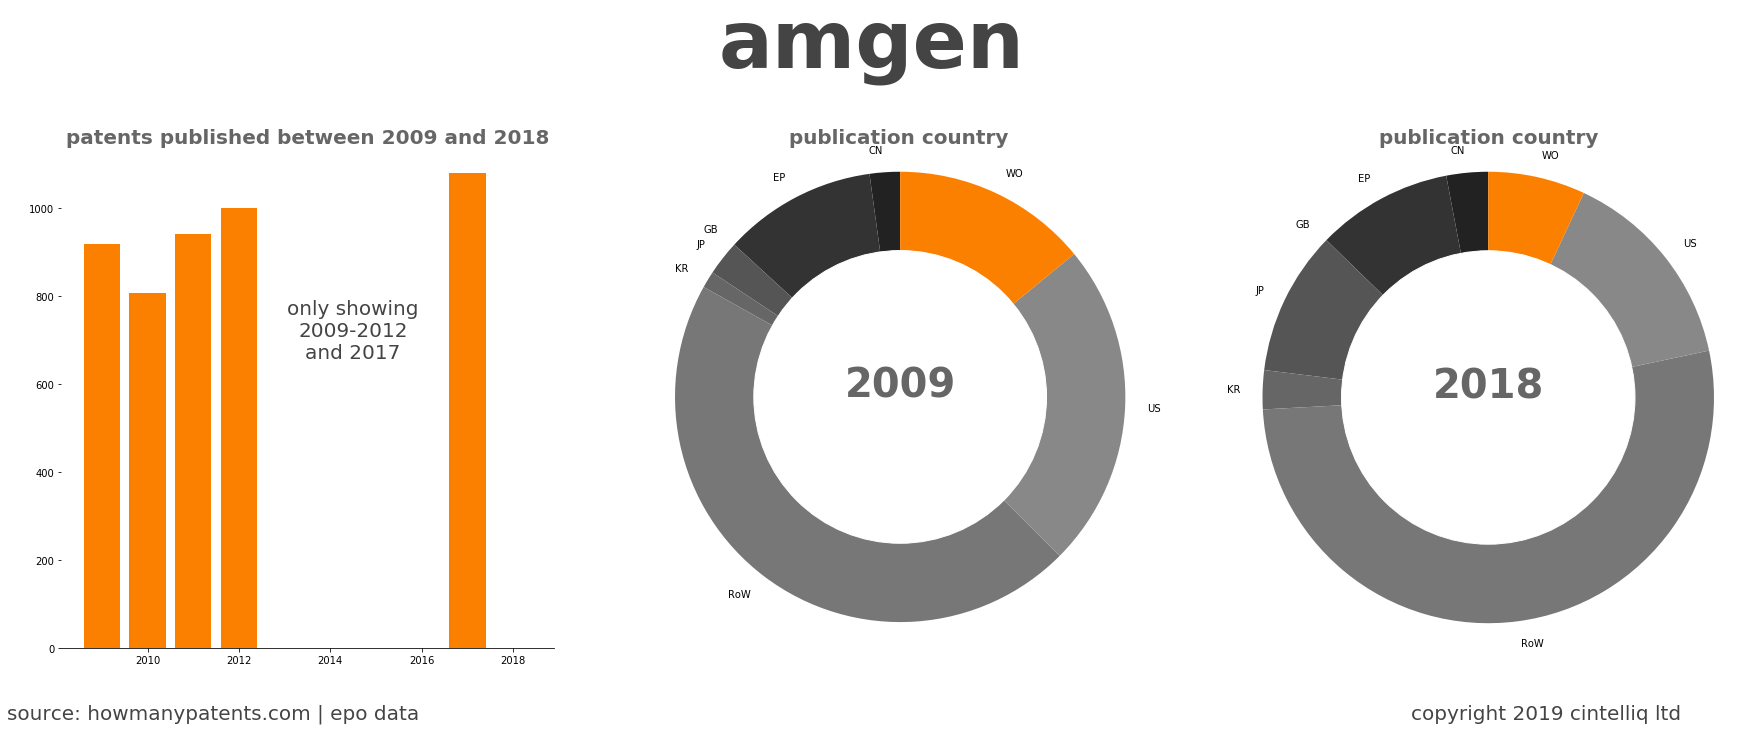 summary of patents for Amgen